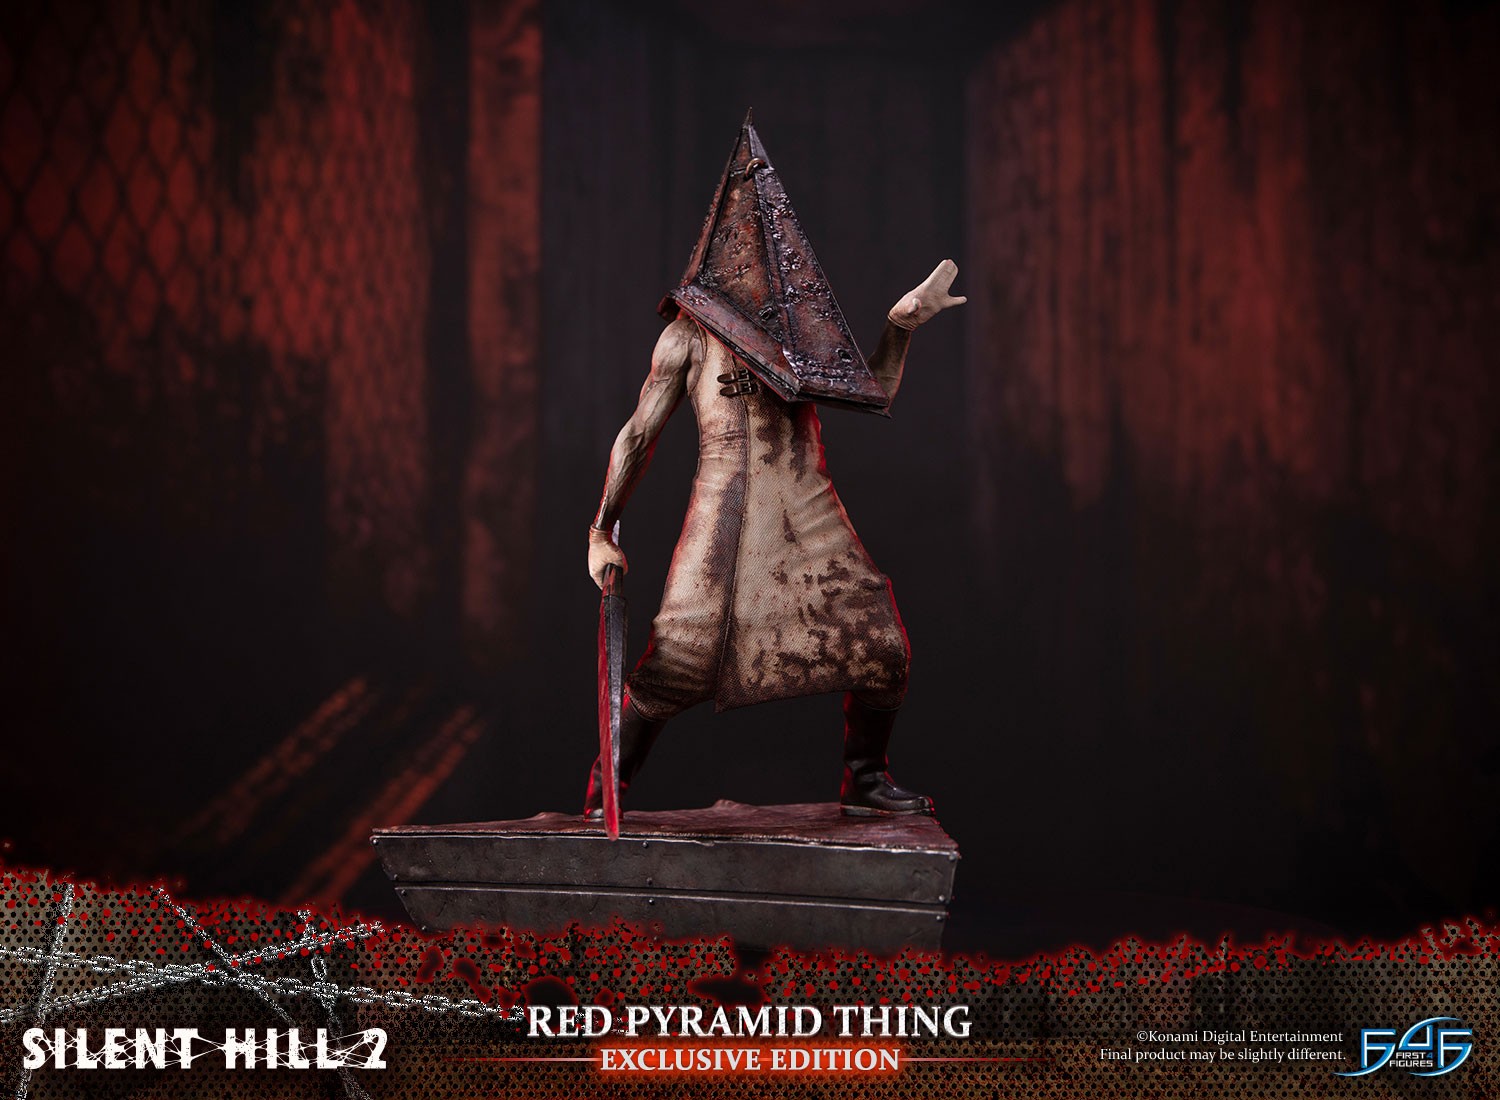 Pyramid head fits perfectlly into the 4 of the teaser, Coincidence